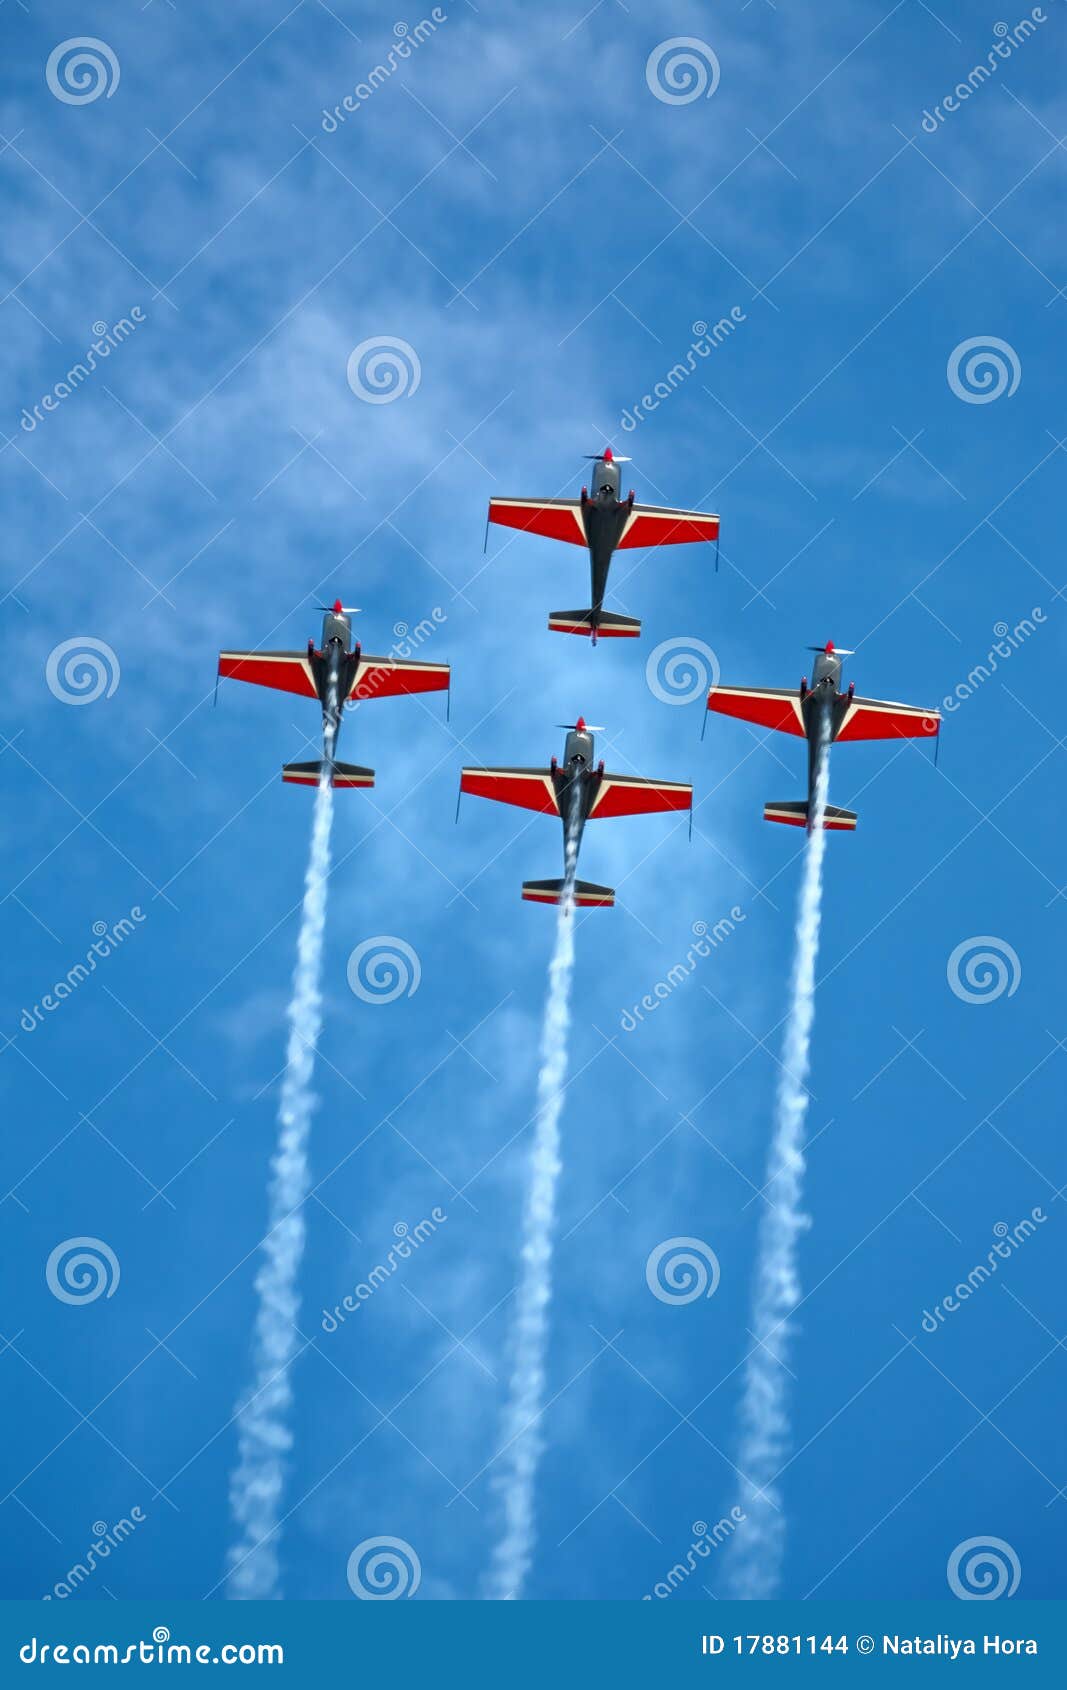 four airplanes on airshow